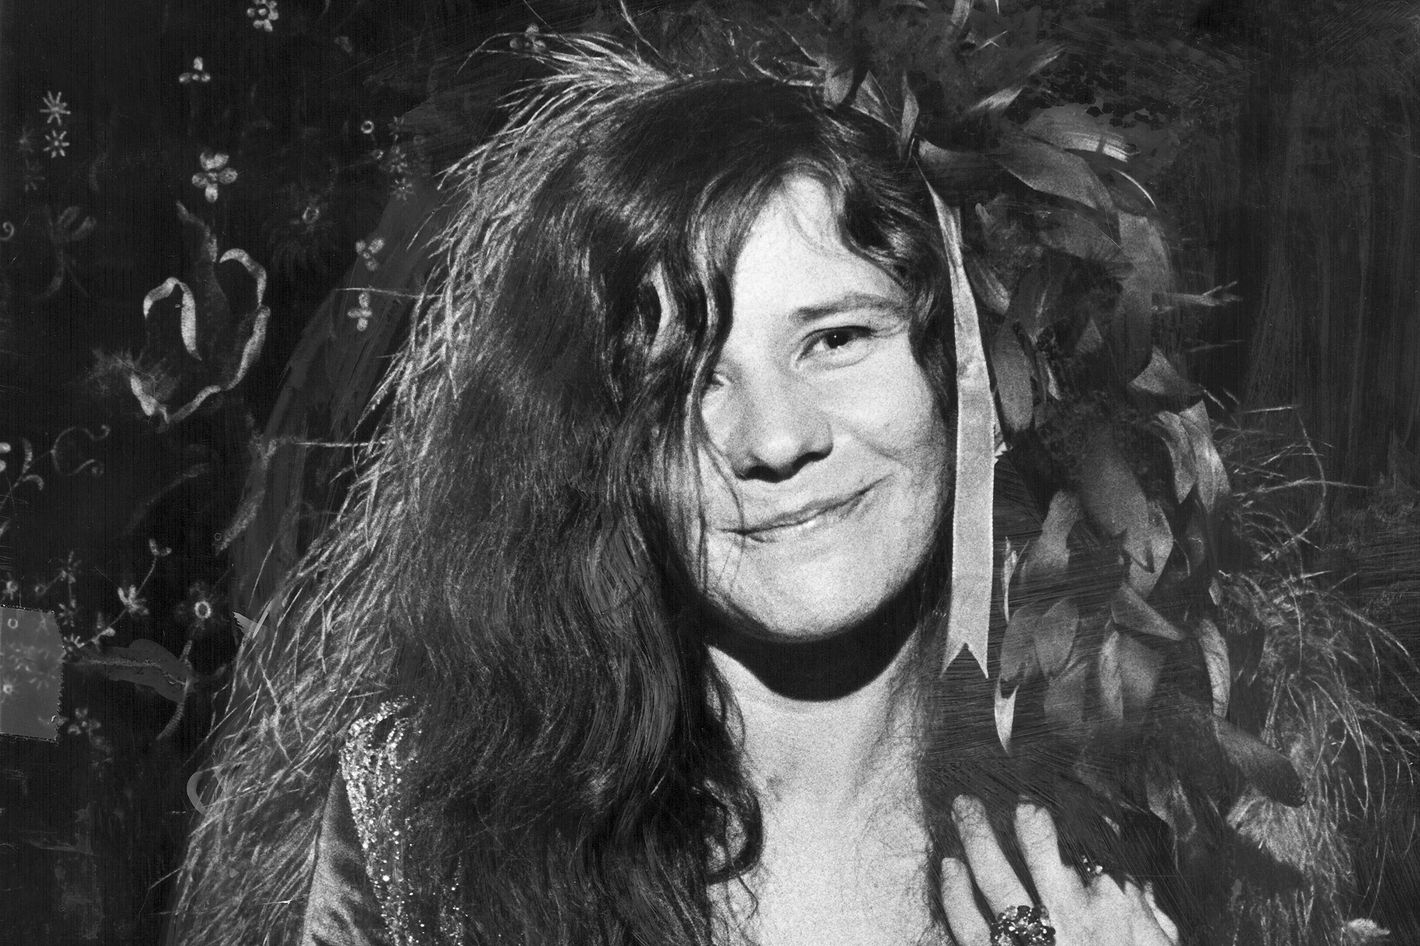 That Time Janis Joplin Made the Hell's Angels Do Household Chores